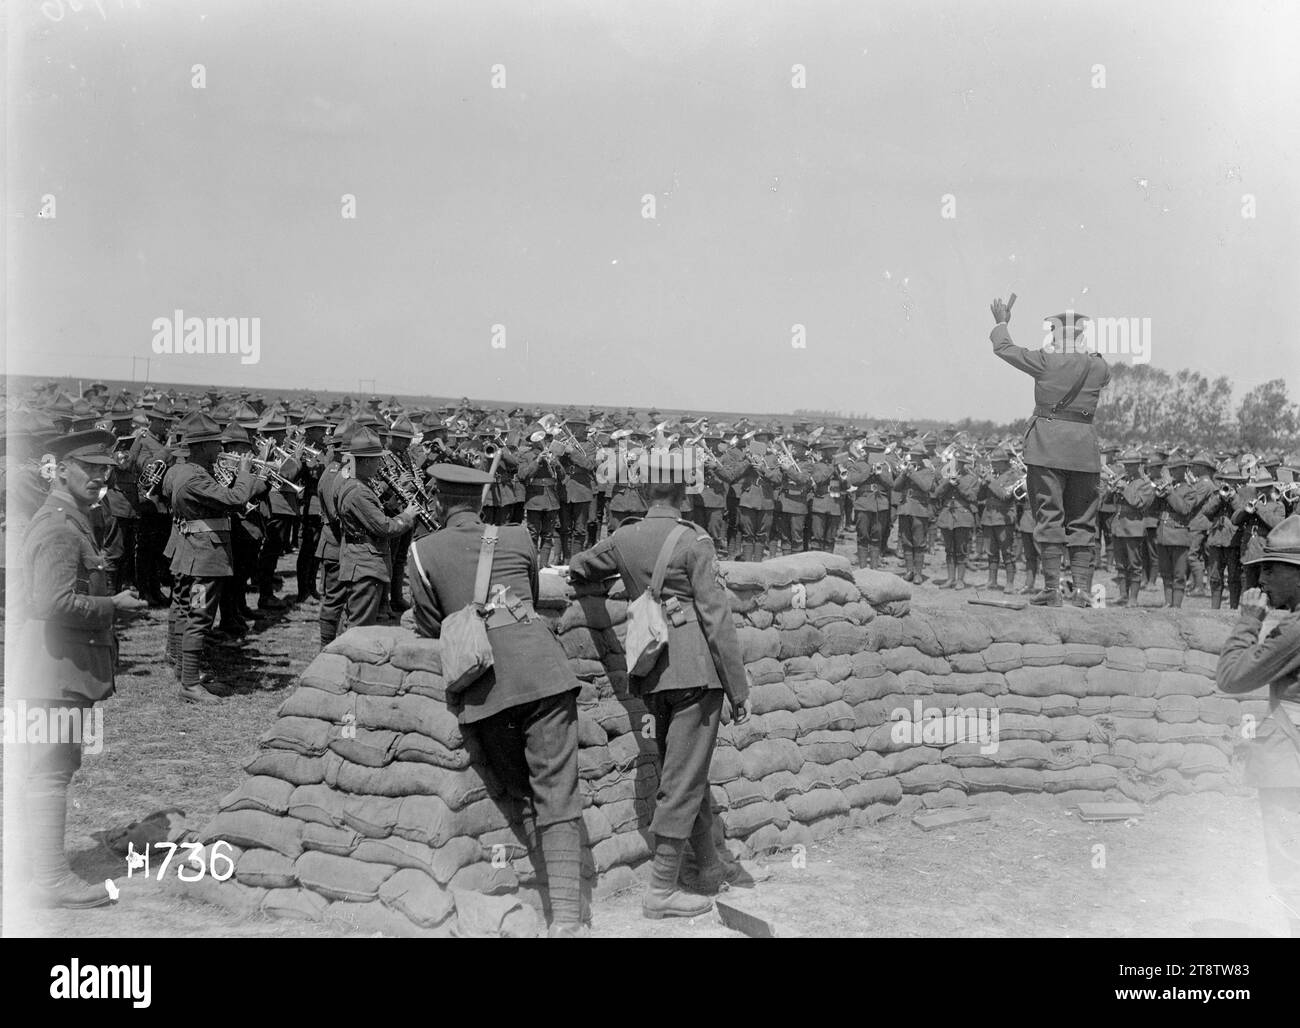 The massed bands being conducted at the New Zealand Divisional Band Contest, France, The massed military bands playing at the New Zealand Divisional Band Contest under the conductorship of the judge who stands on a wall of sandbags. Photograph taken Authie 27 July 1918 Stock Photo